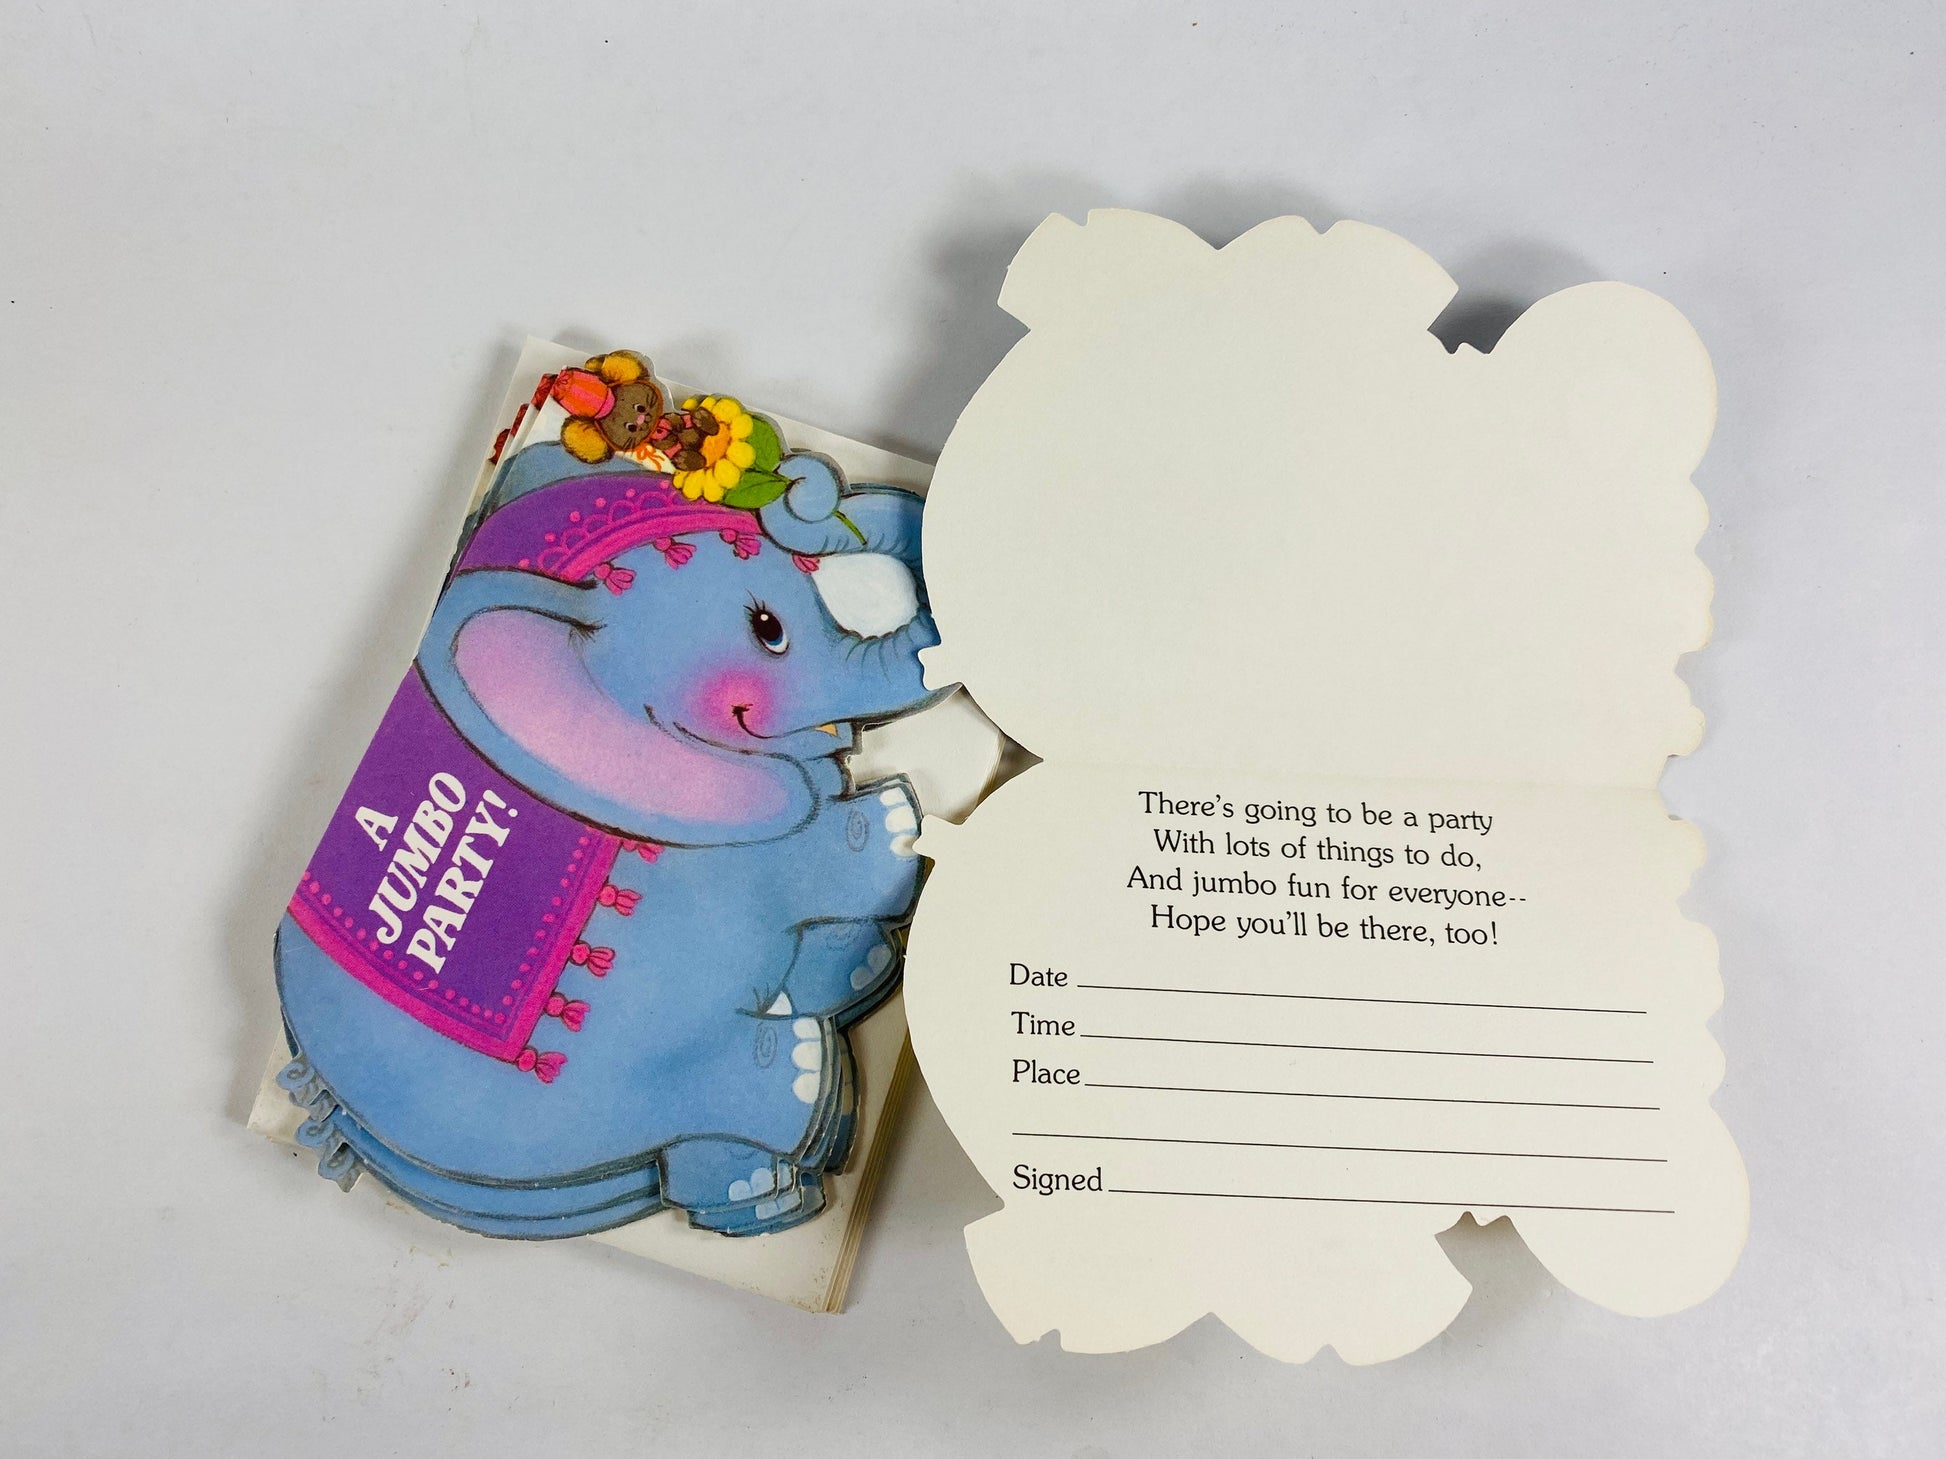 Vintage blue elephant & mouse Hallmark party invitation cards circa 1979. Lot of 4 unused cards with envelopes.